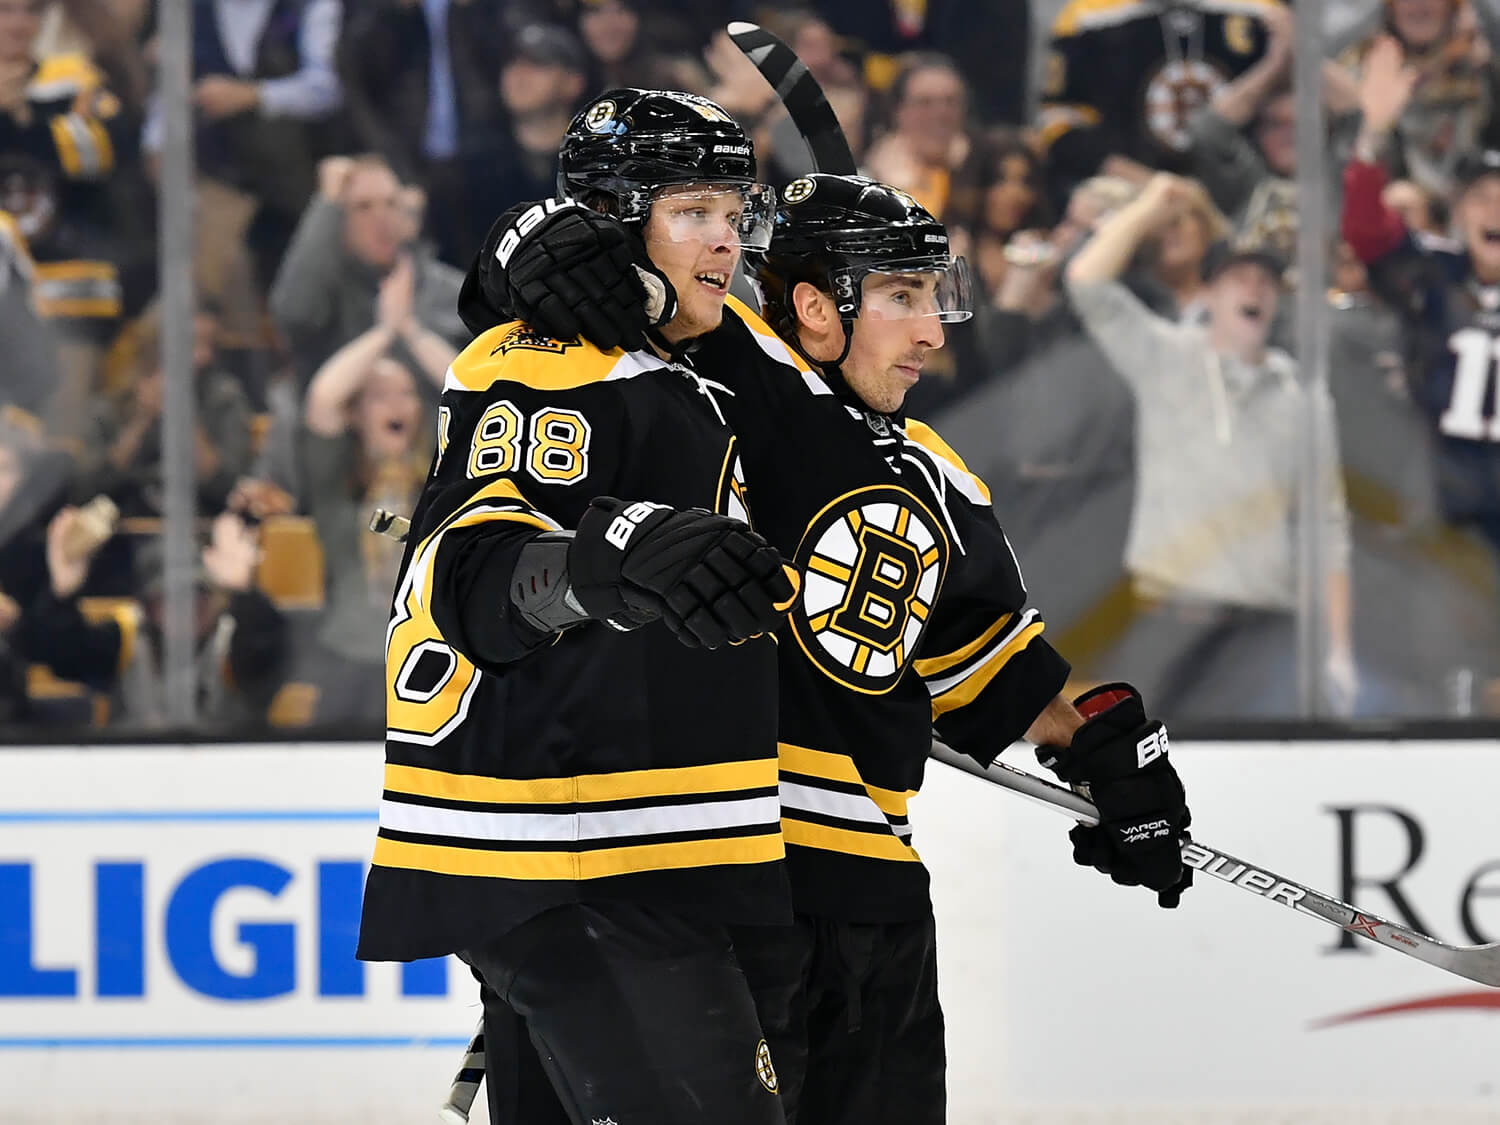 The Bruins Cannot Afford To Be “Perfect”